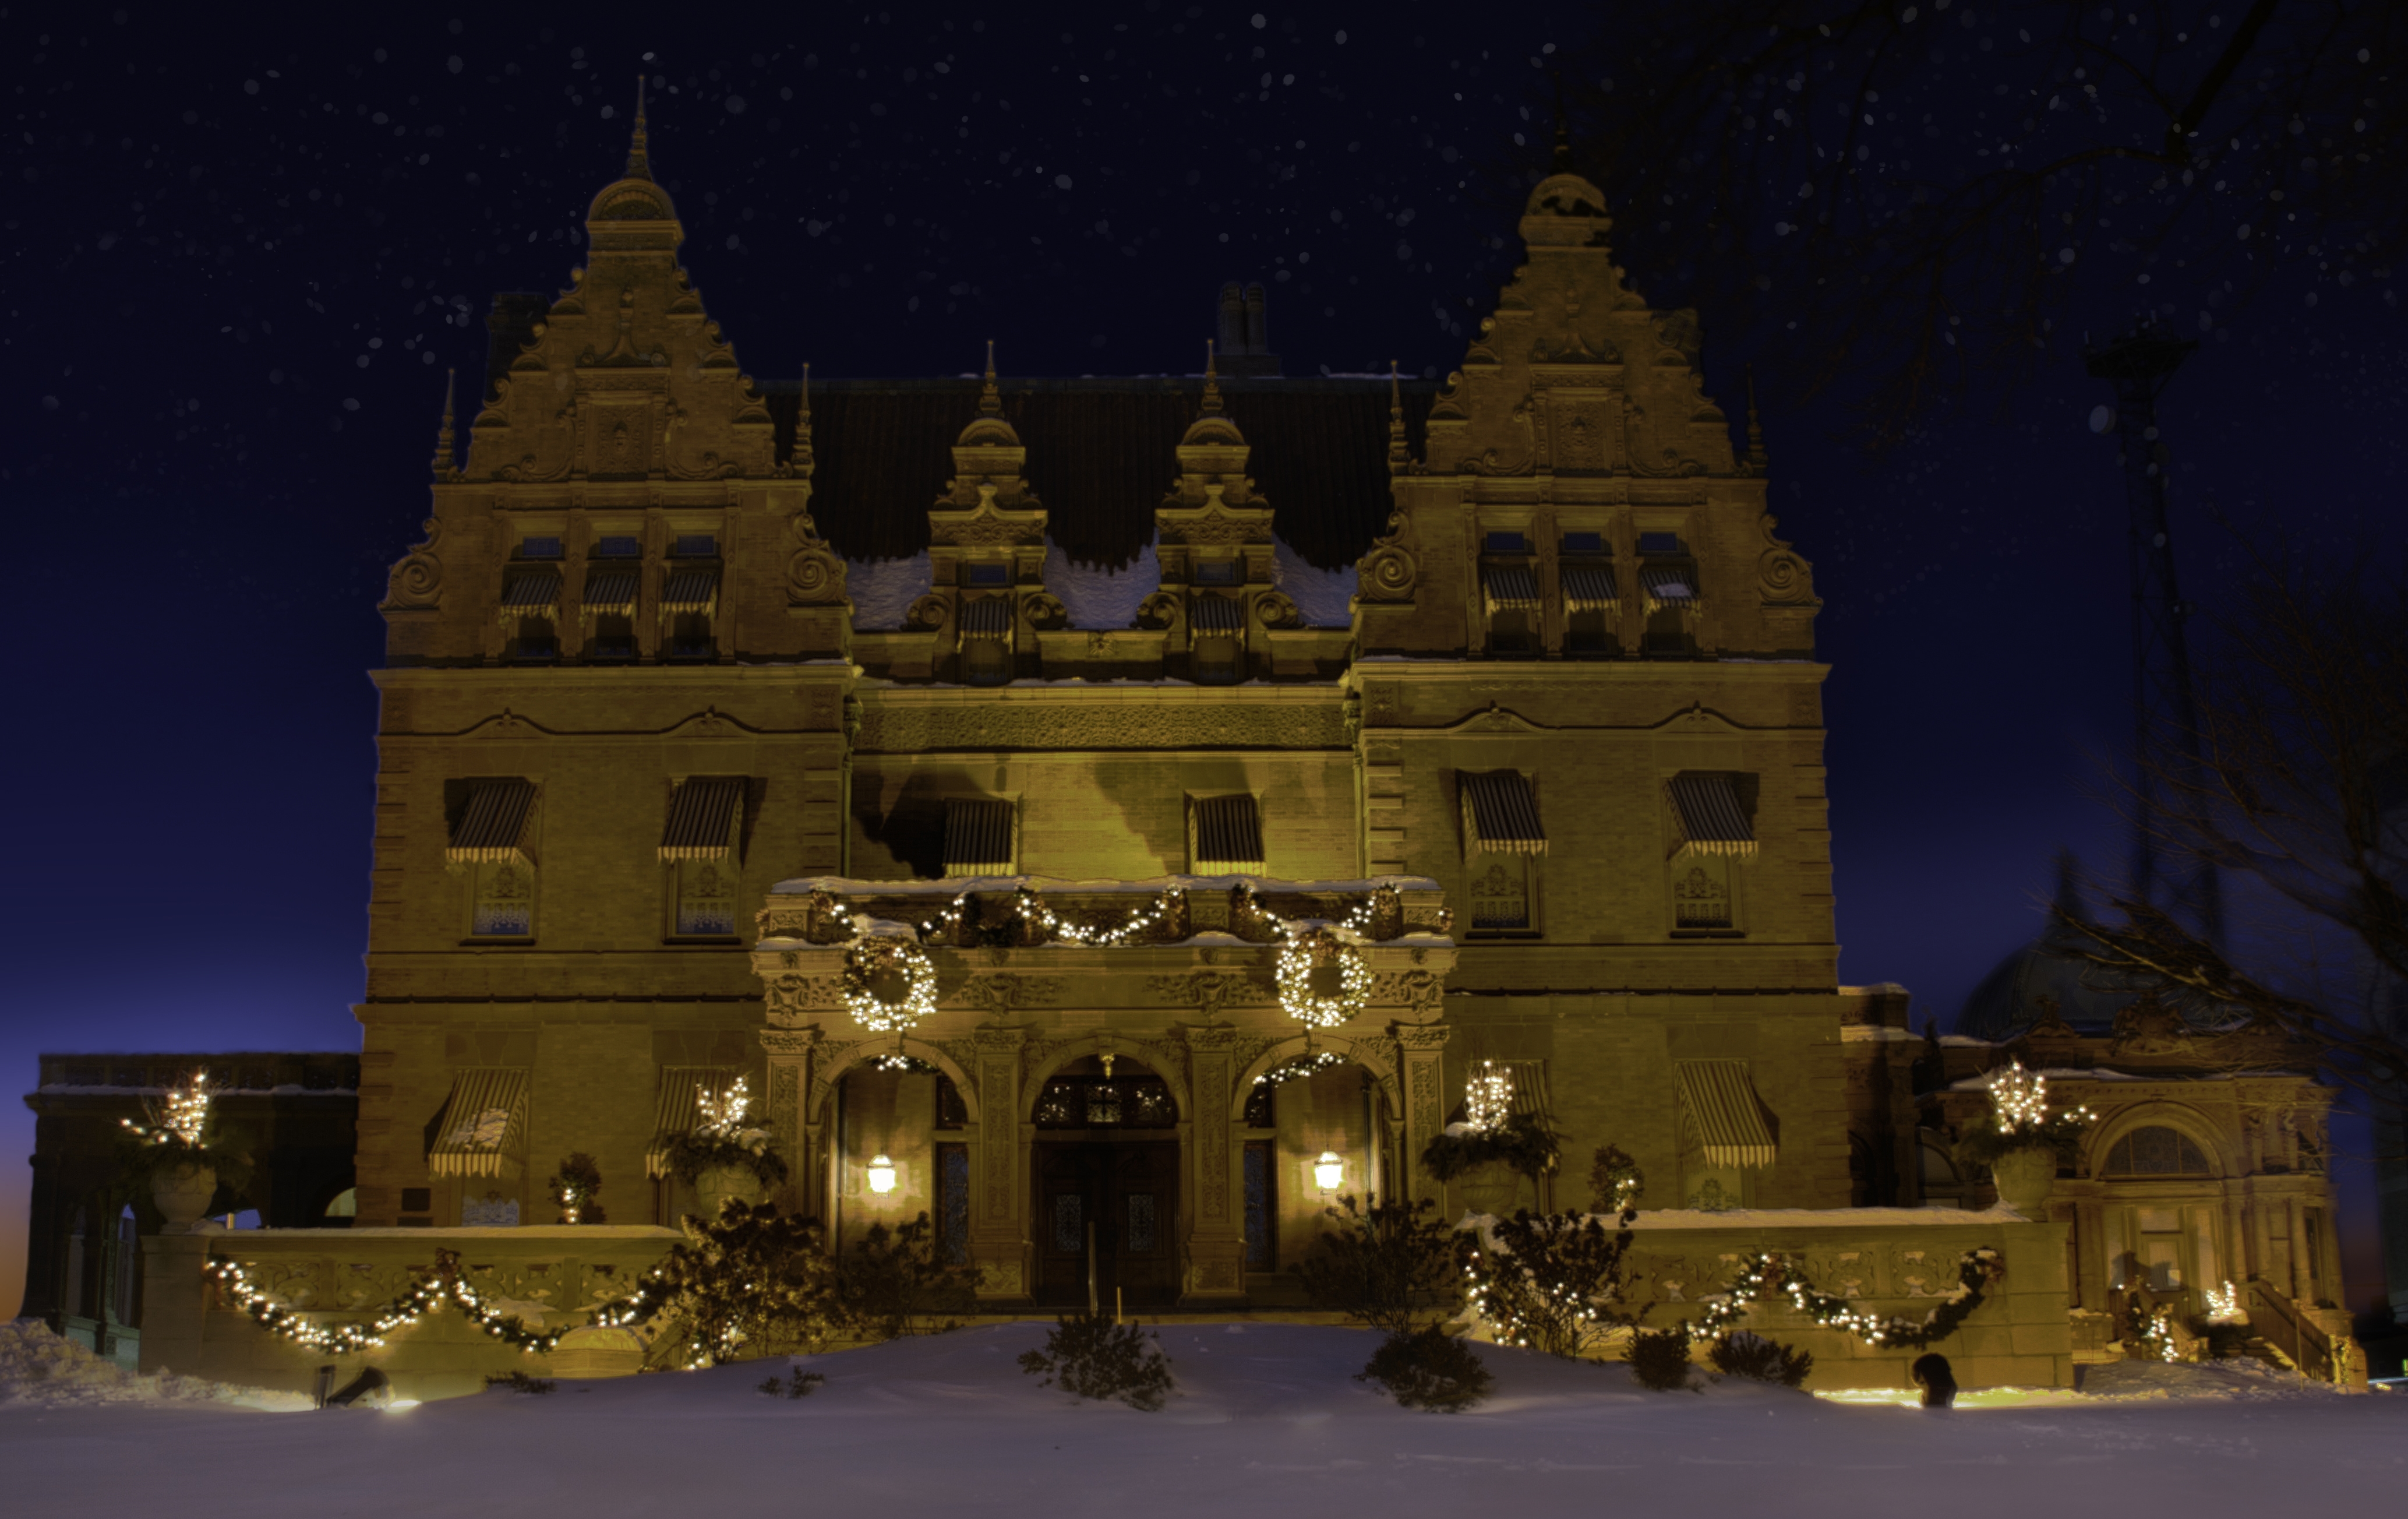 The Pabst Mansion. Photo courtesy of The Pabst Mansion.